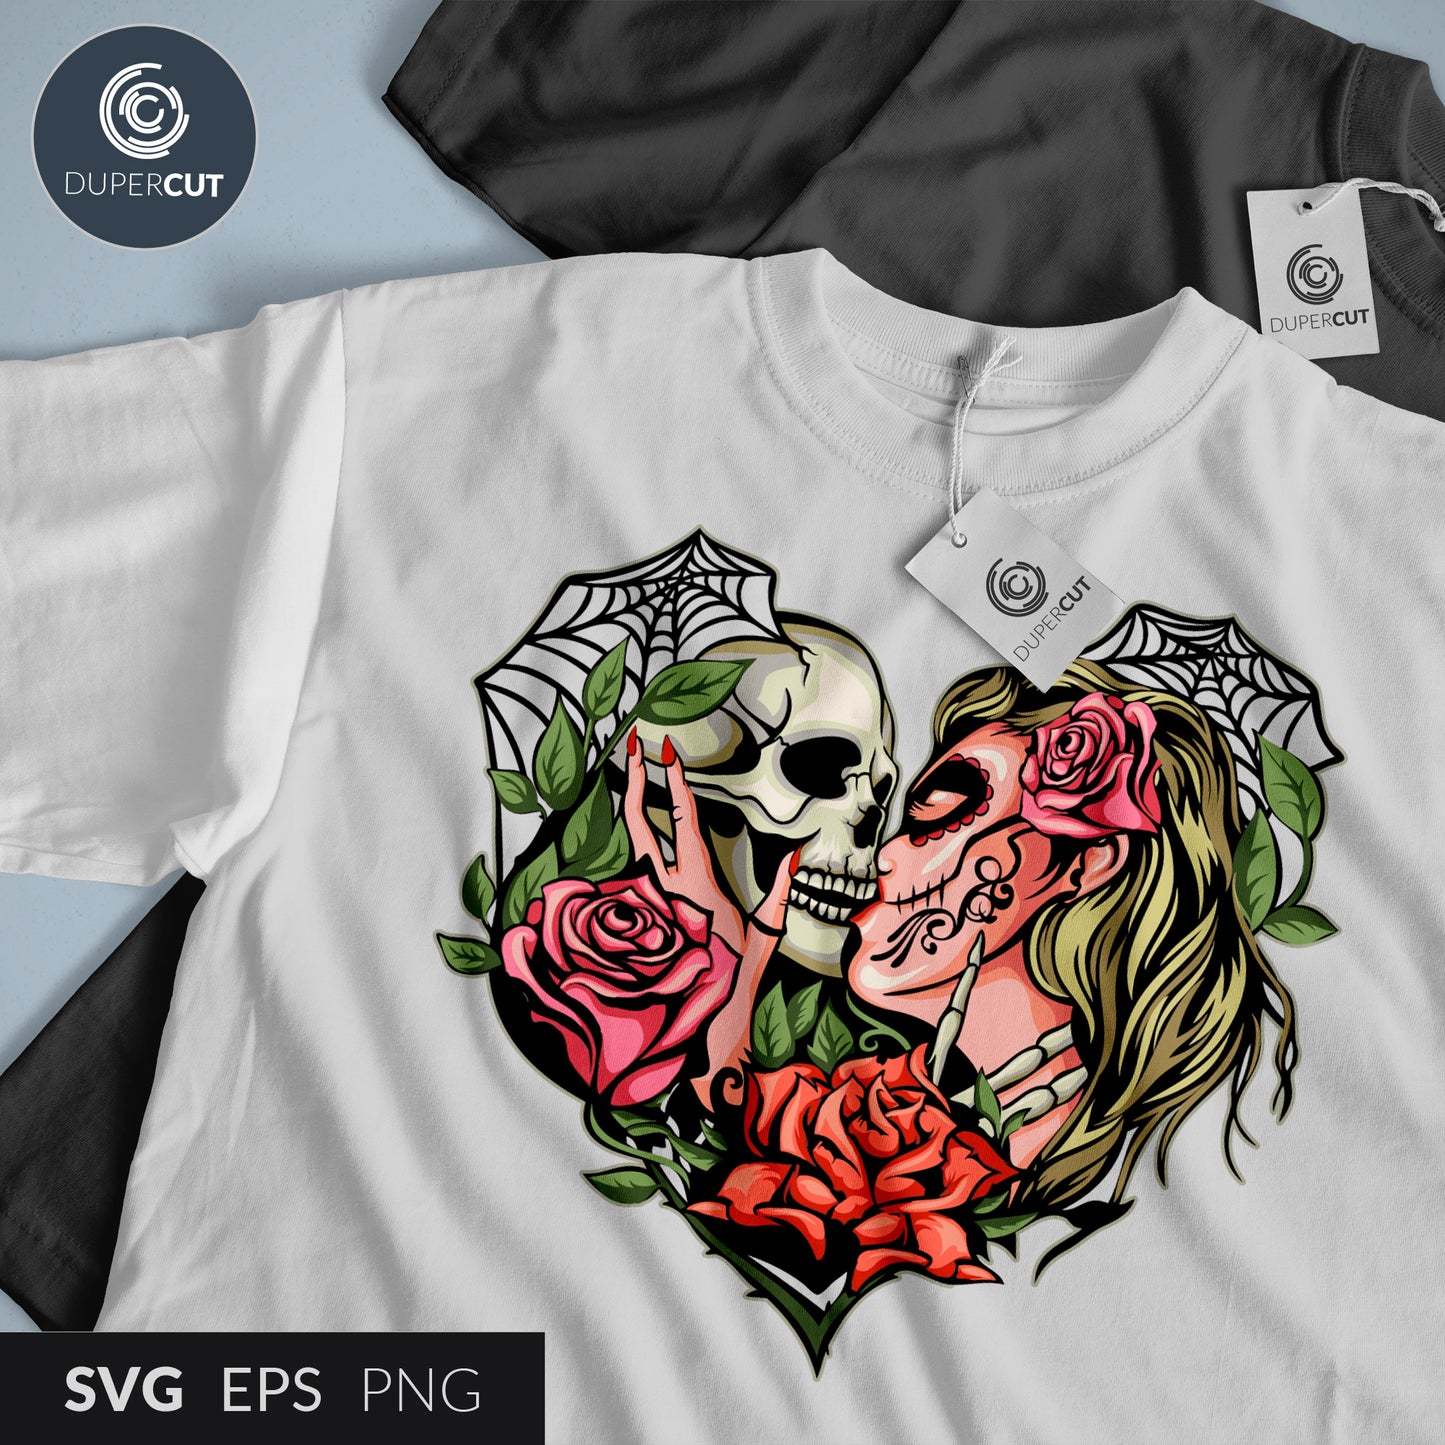 Sugar Skull kiss, day of the dead - Custom t-shirt design template - EPS, SVG, PNG files. Vector Colour illustration for print on demand, sublimation, custom t-shirts, hoodies, tumblers.